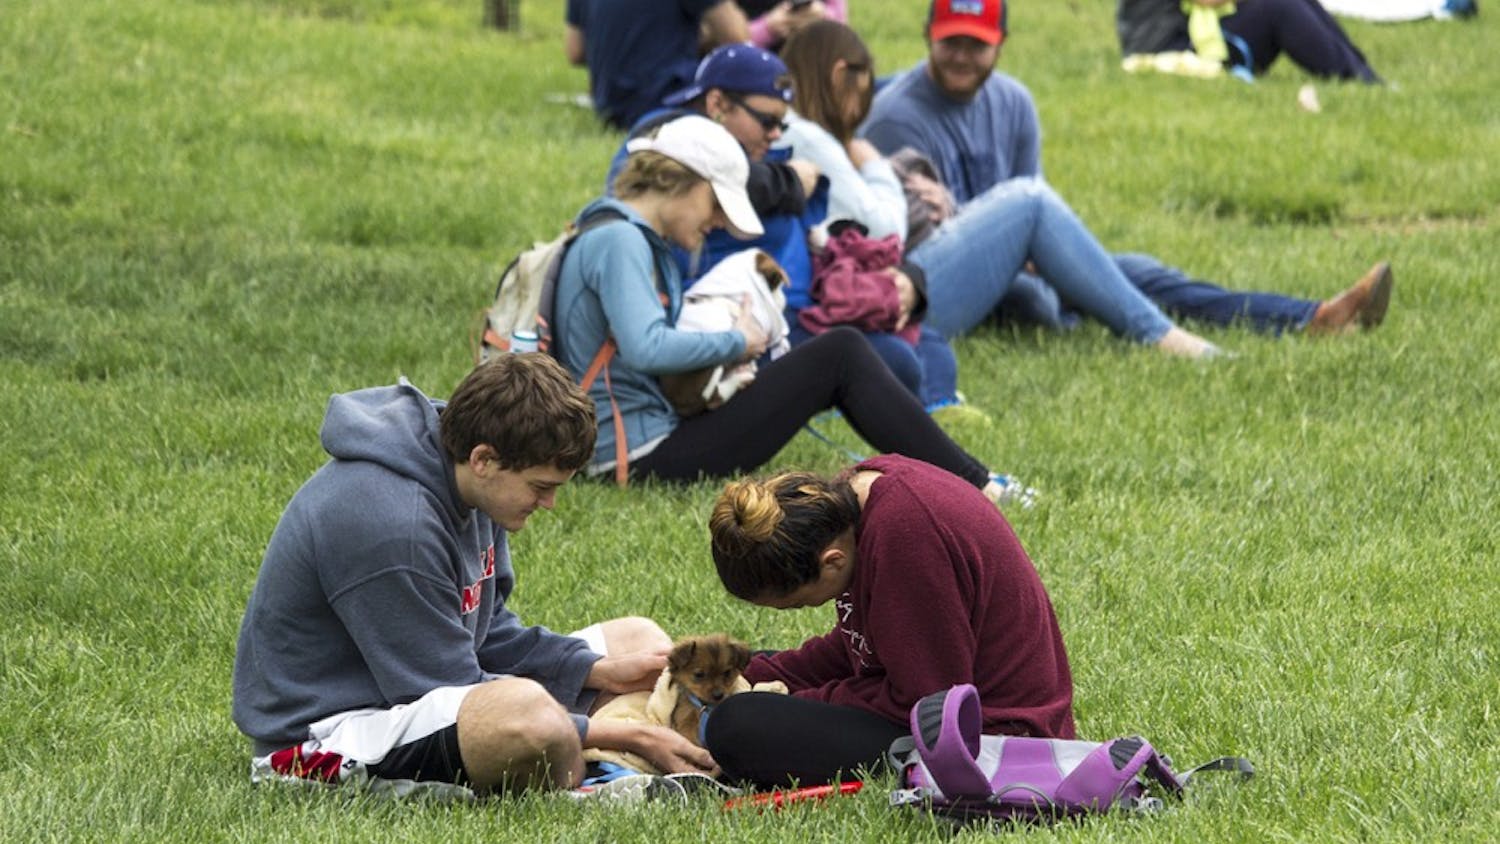 Students gathered in Dunn Meadow Thursday afternoon to participate in the annual Rent-a-Puppy event.